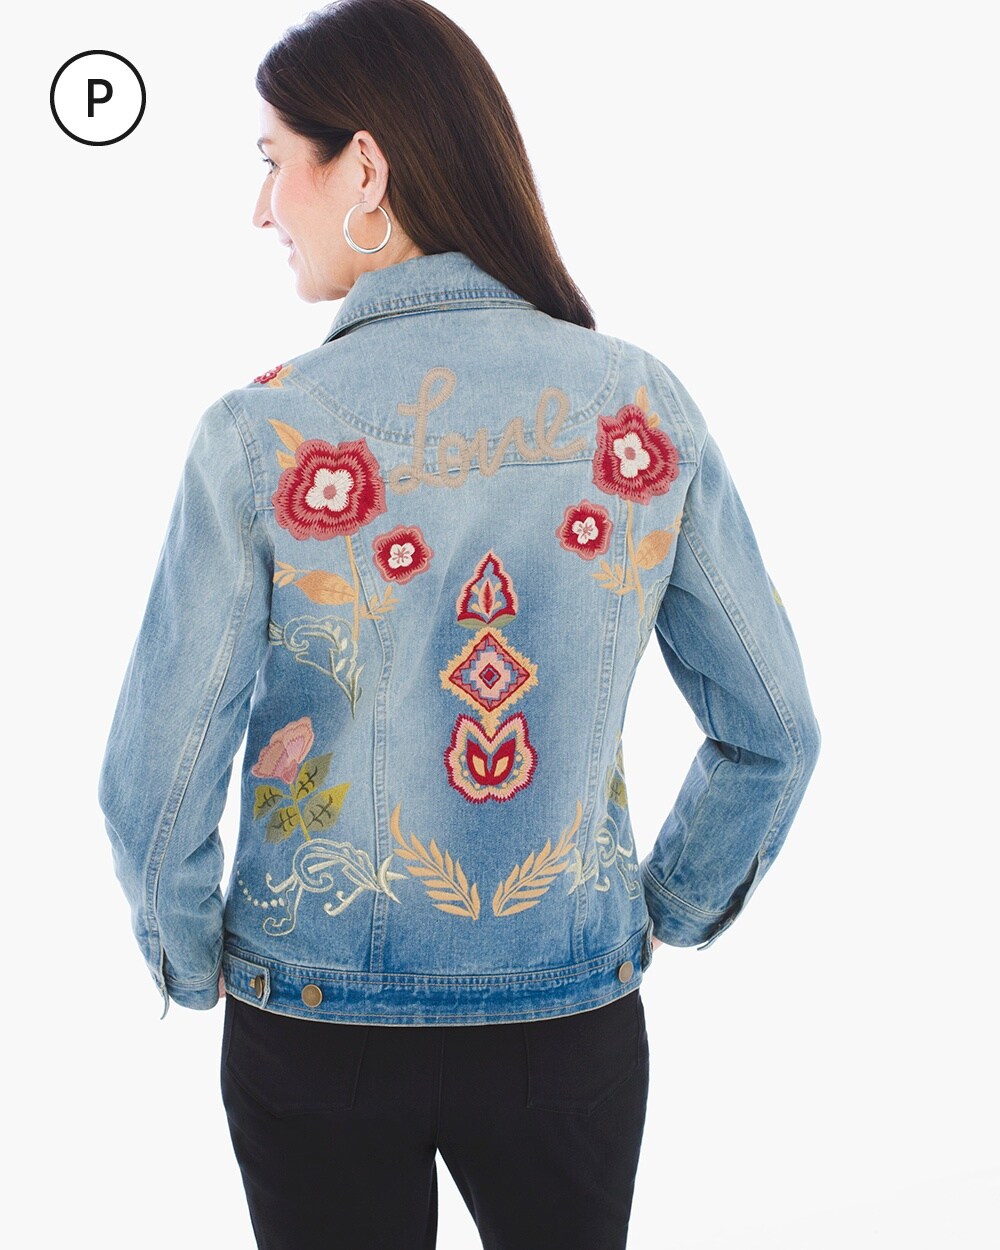 Collectibles Petite Embroidered Denim Jacket - Chico's